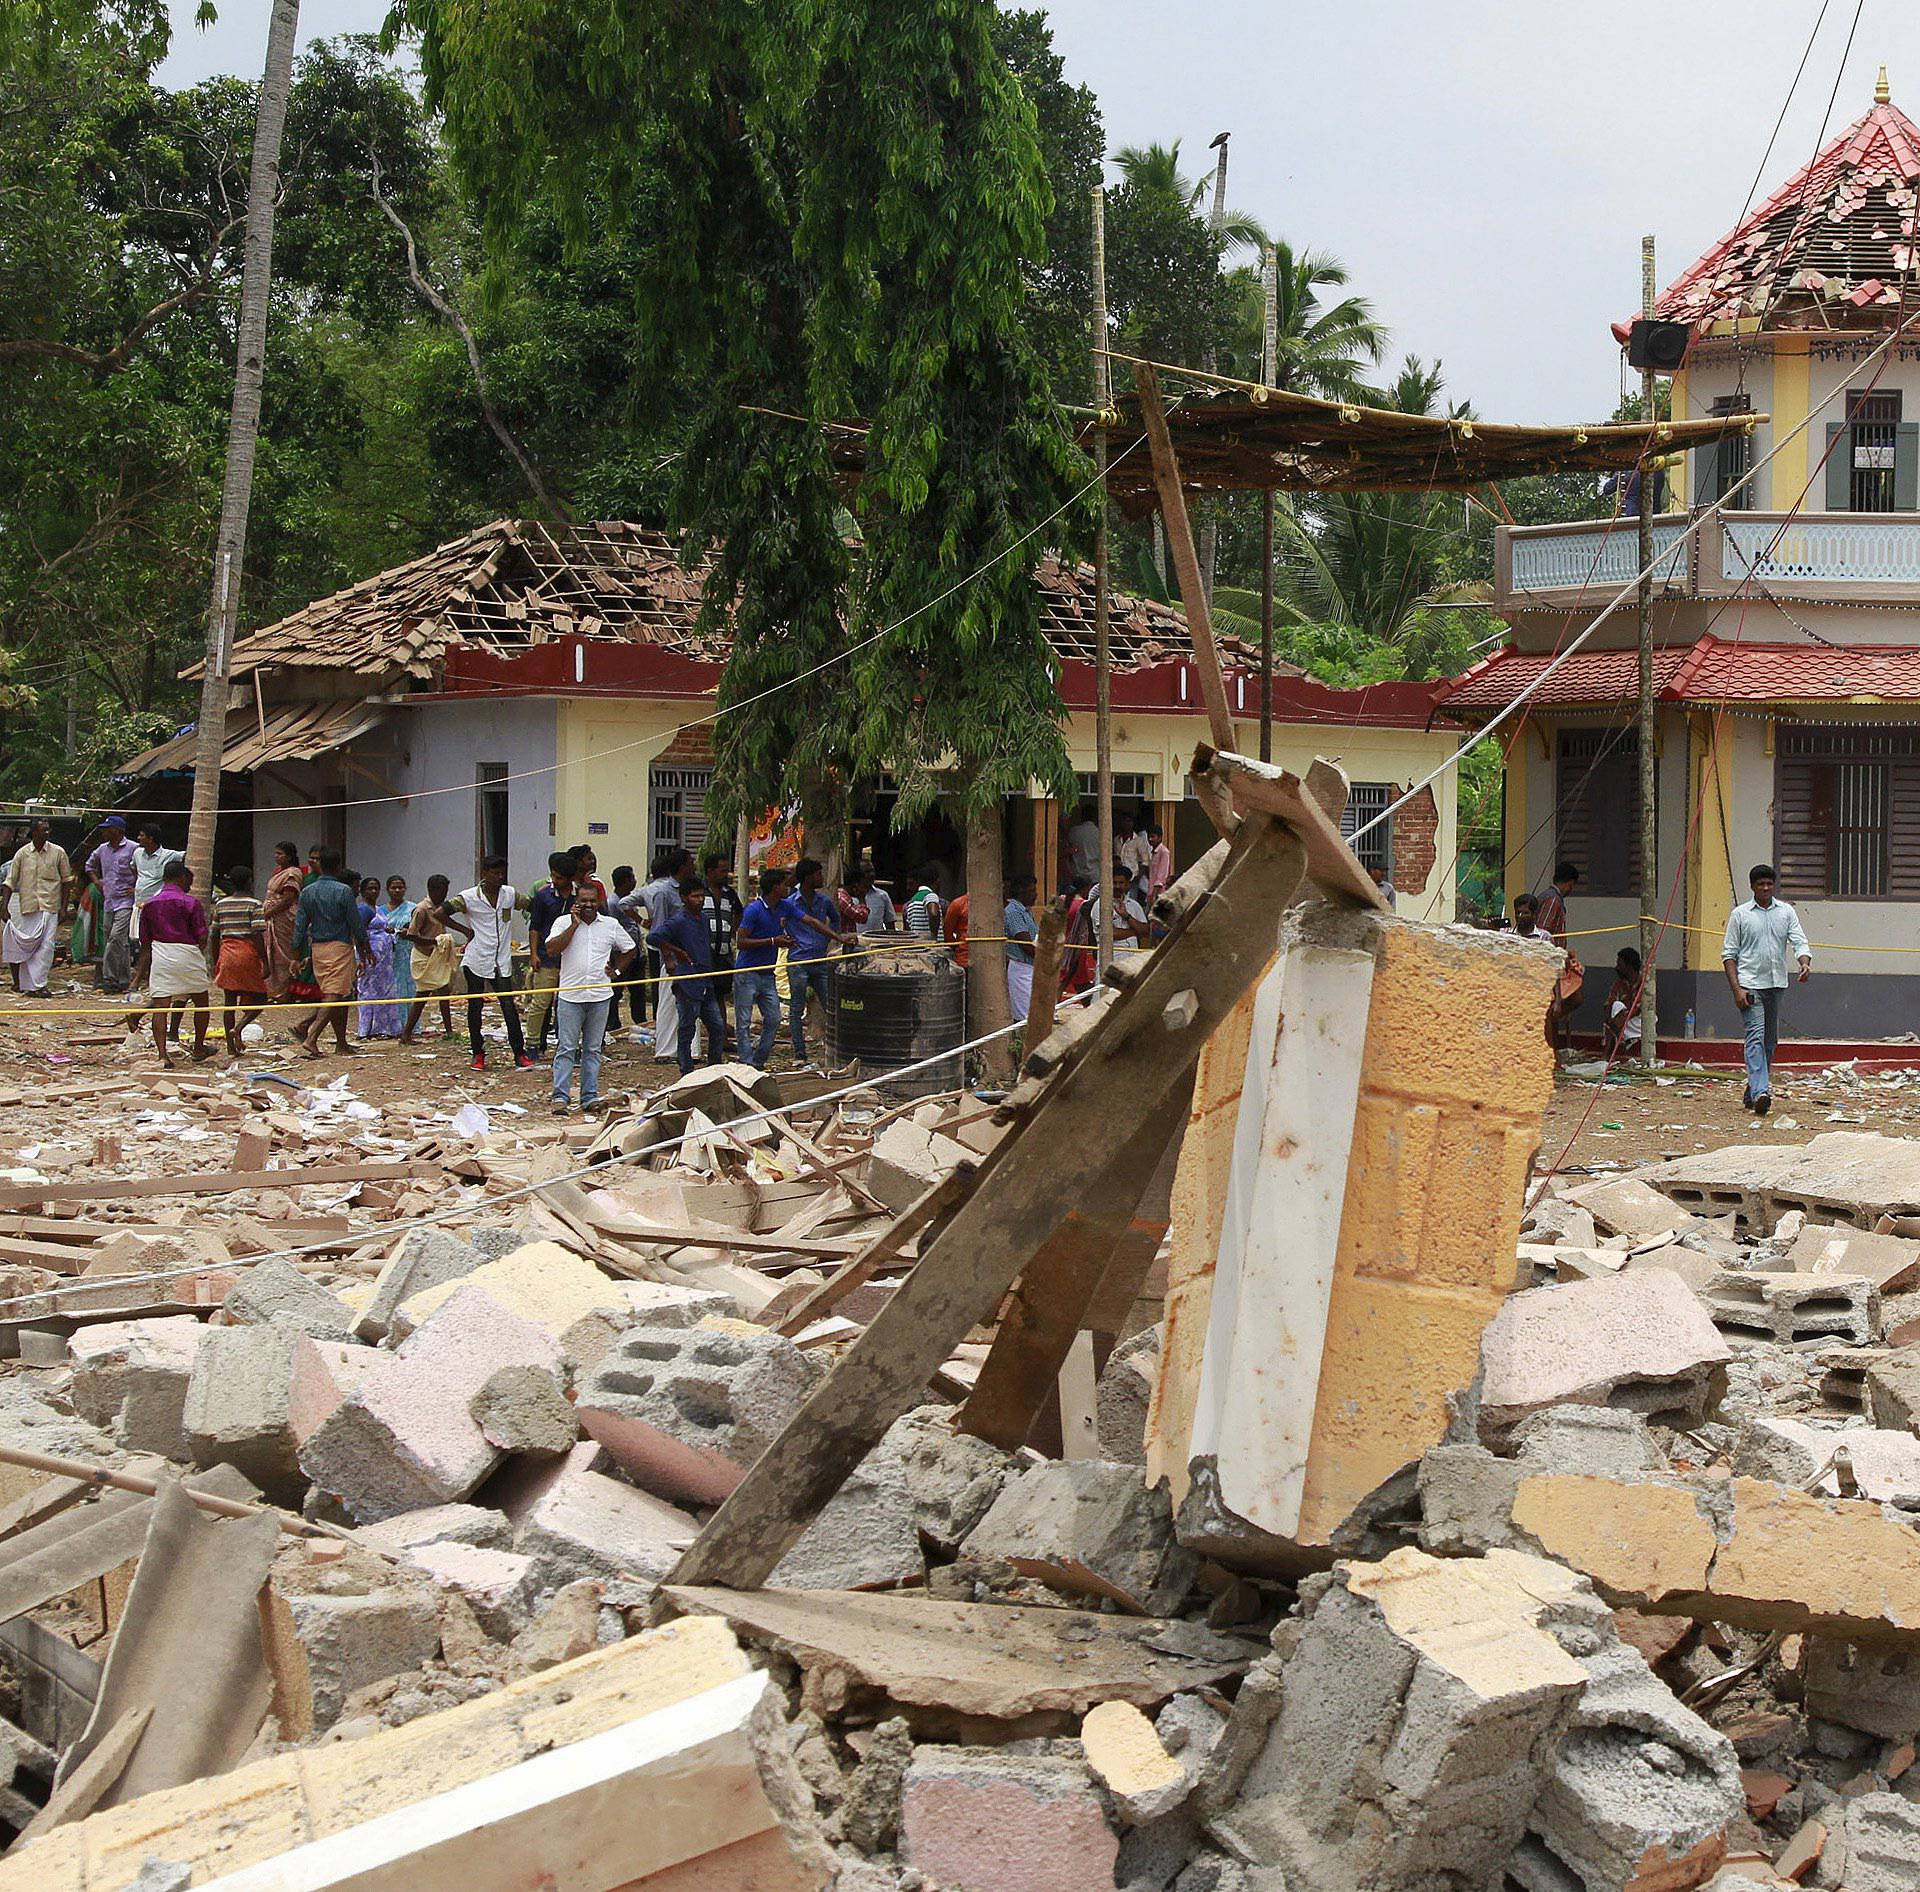 People stand next to debris after a broke out at a temple in Kollam in the southern state of Kerala